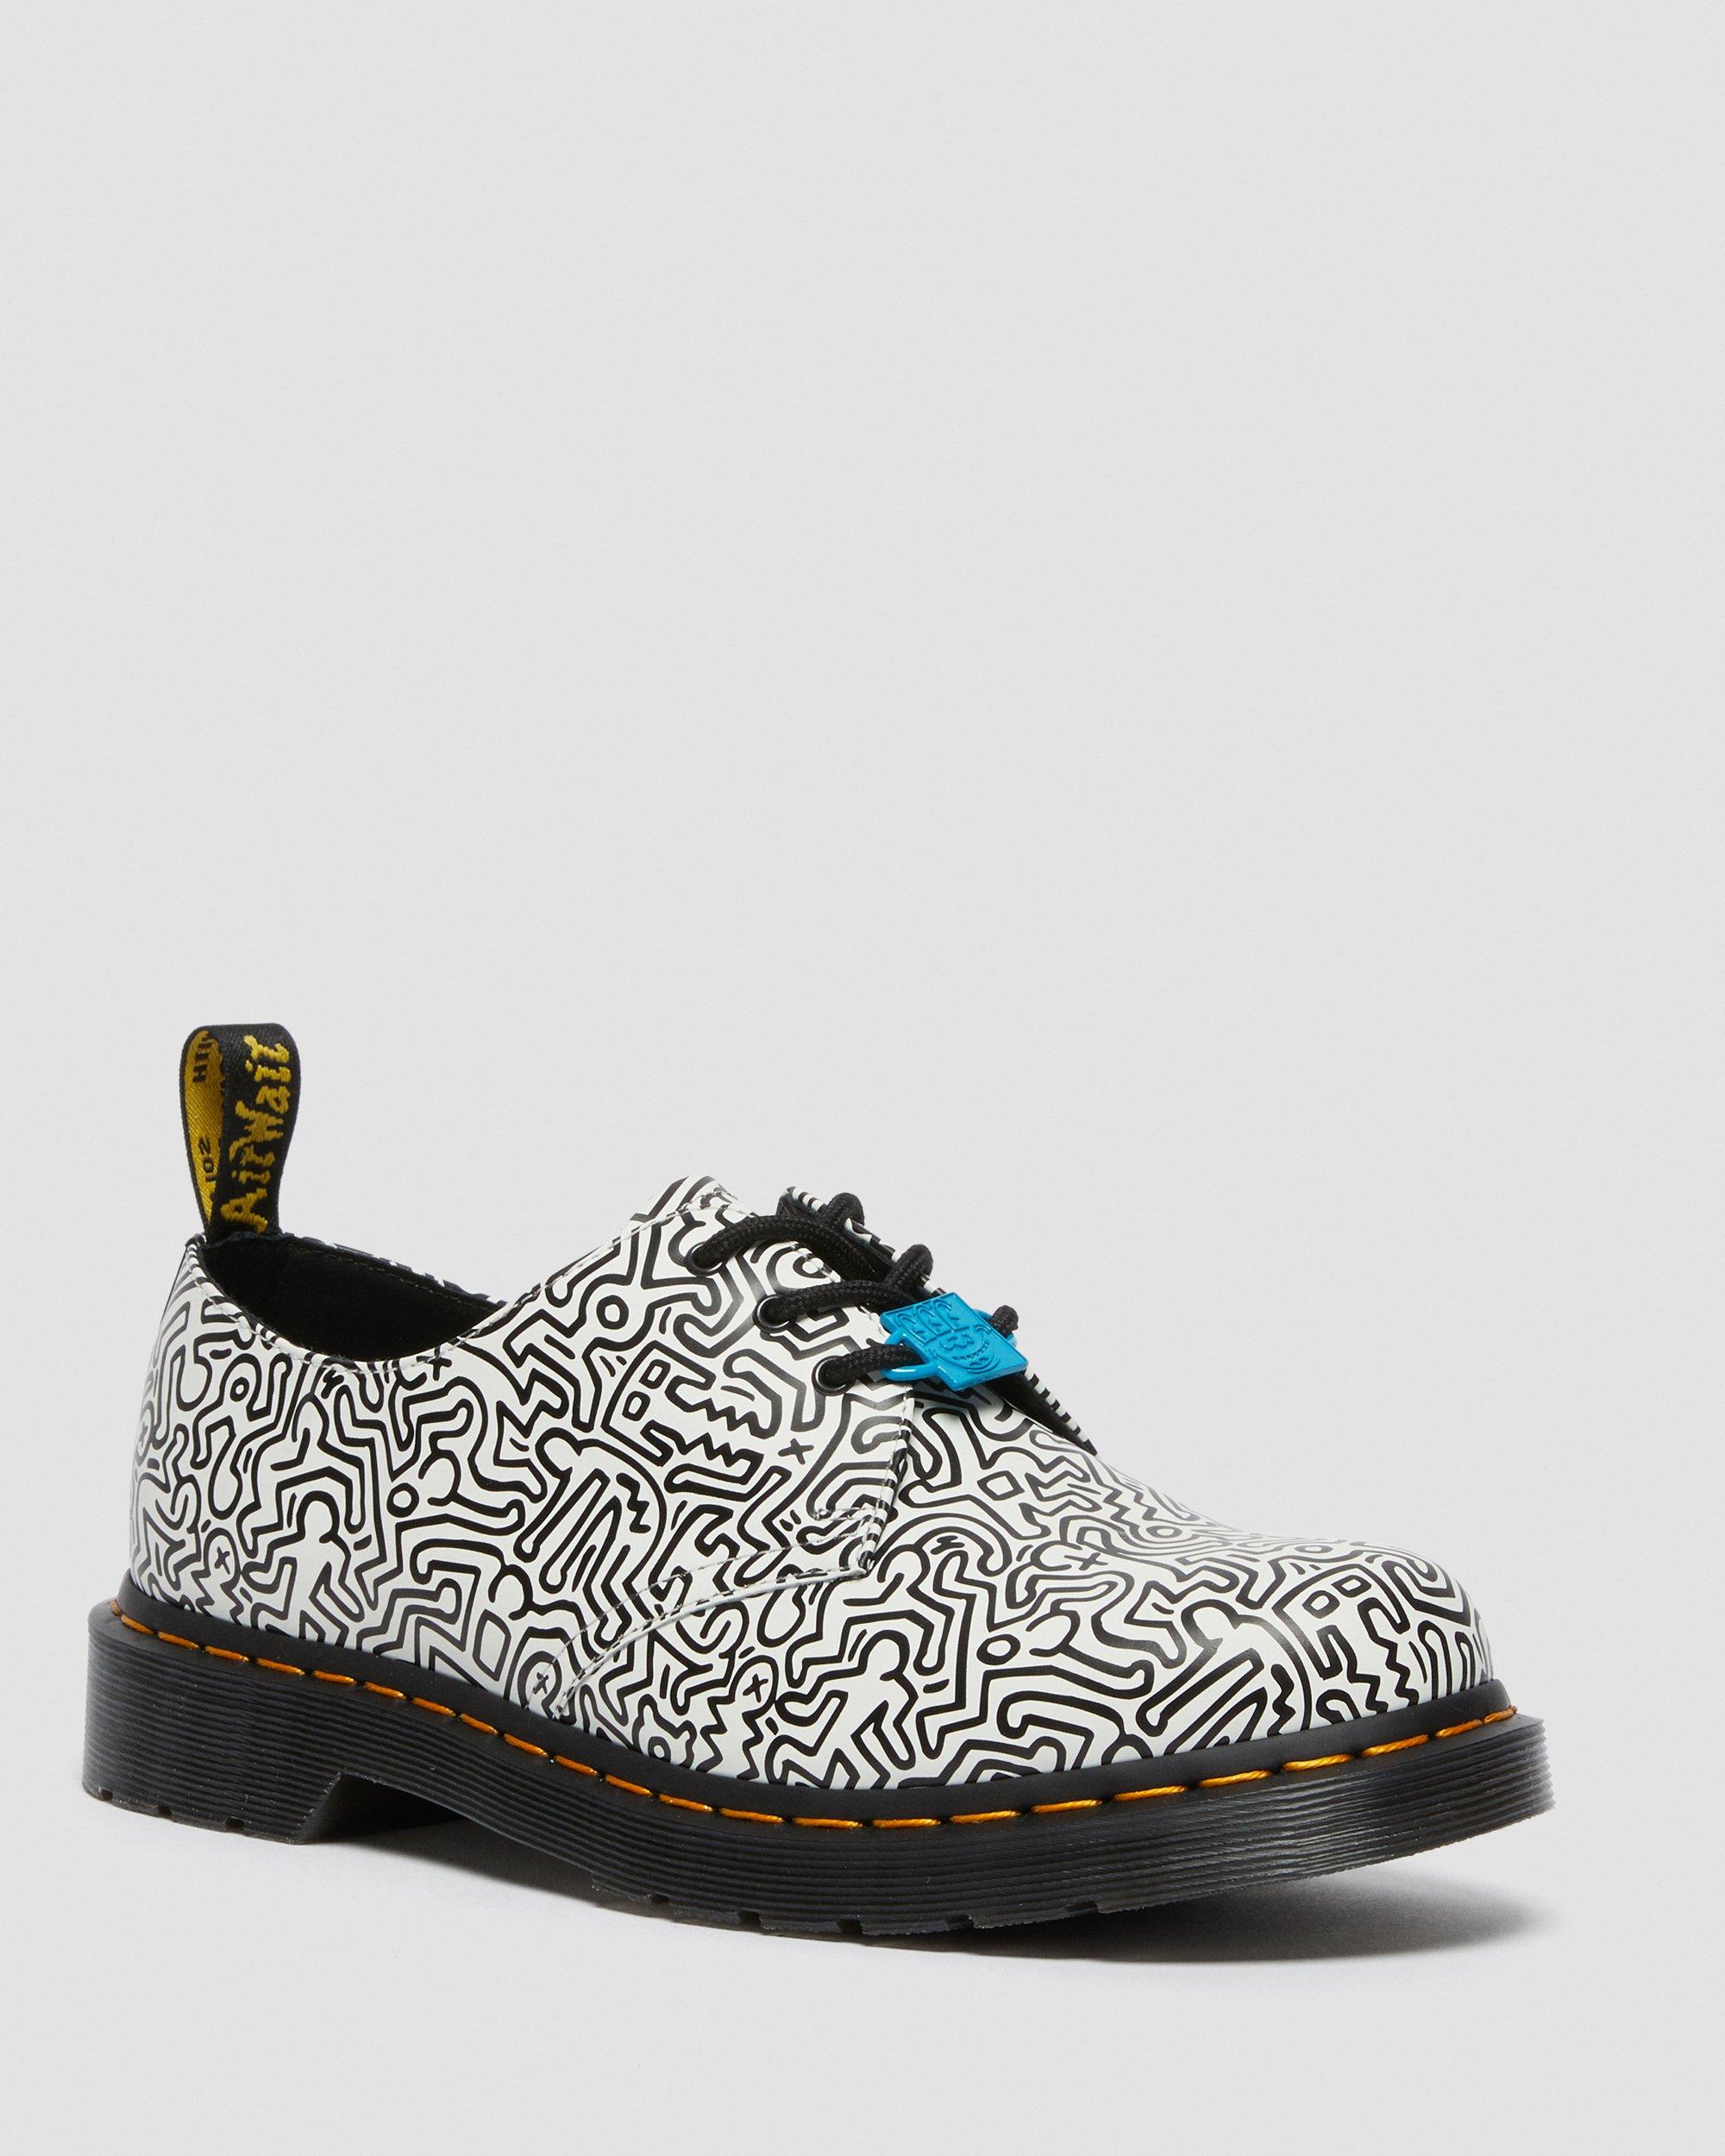 https://i1.adis.ws/i/drmartens/26833009.88.jpg?$large$1461 Keith Haring Black & White Printed Leather Shoes Dr. Martens